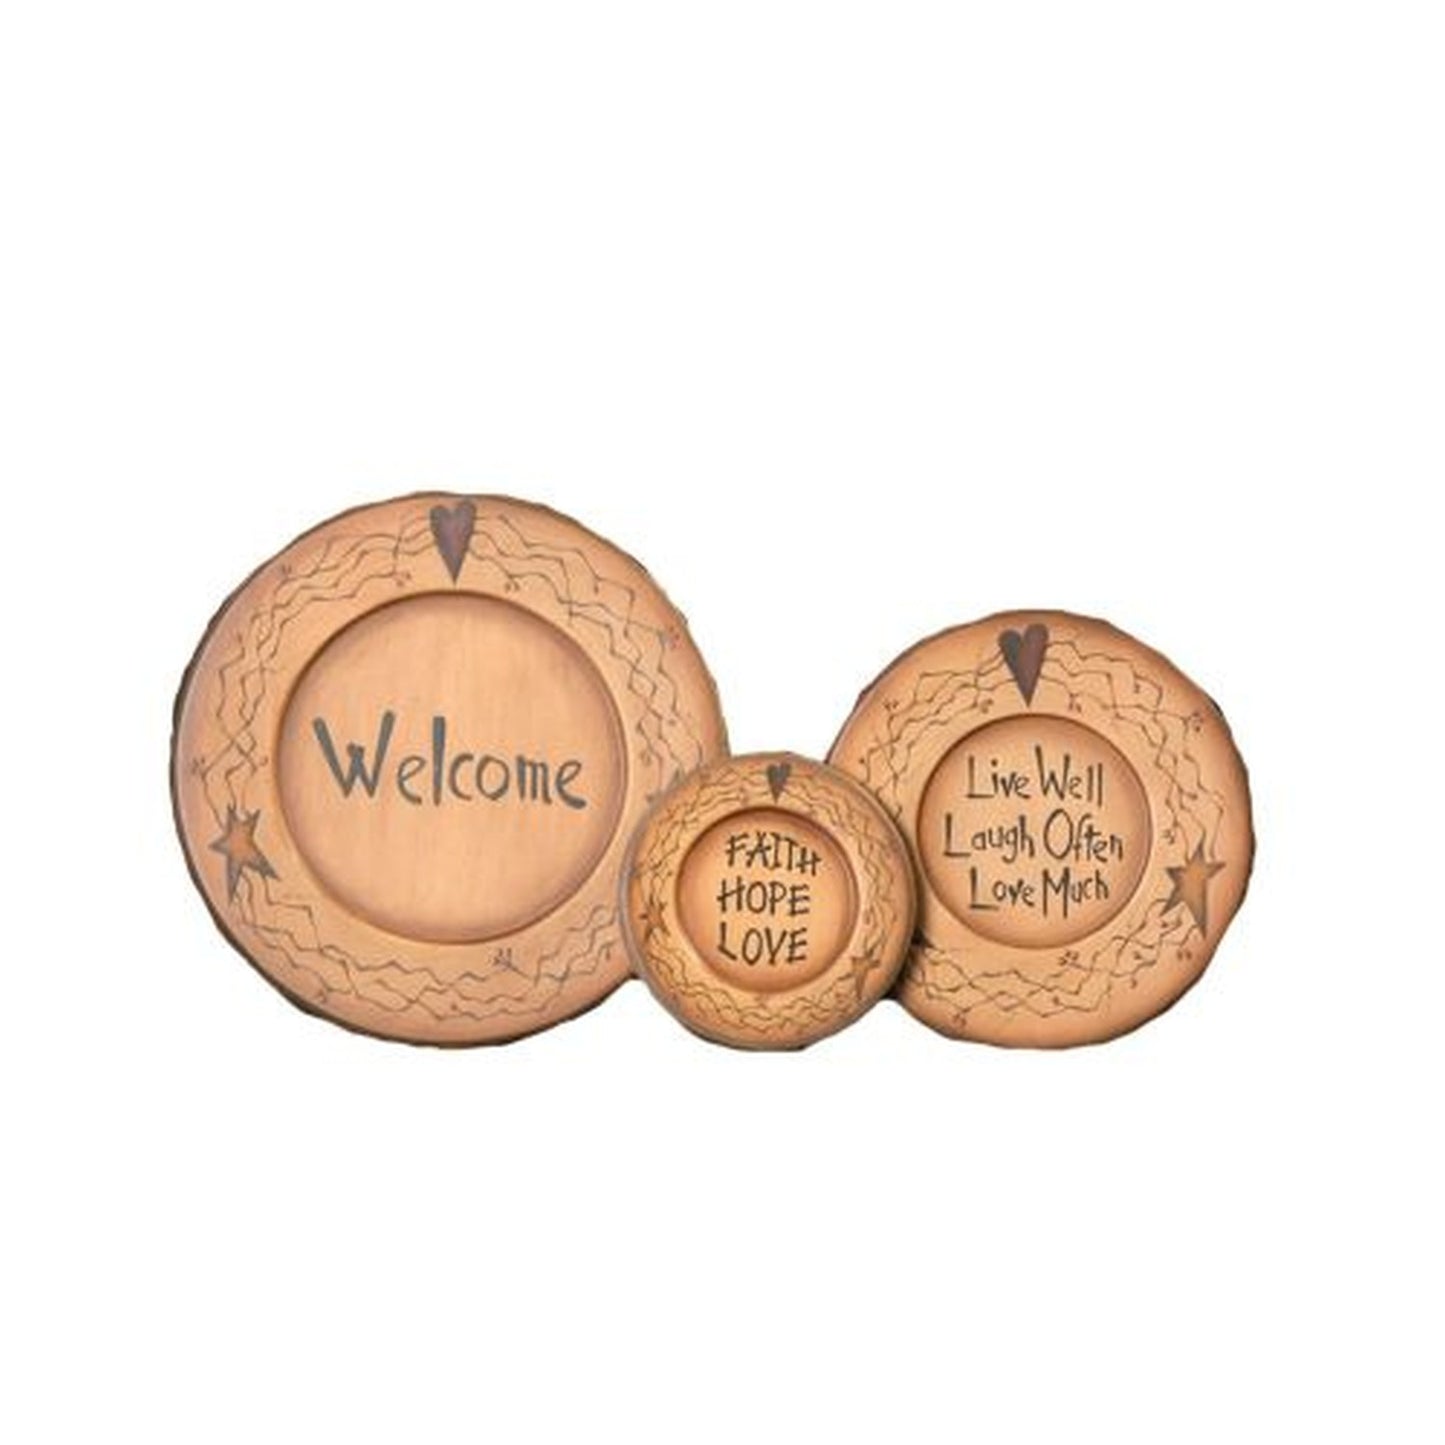 Your Heart's Delight Wooden Plates - Star/Heart, Welcome